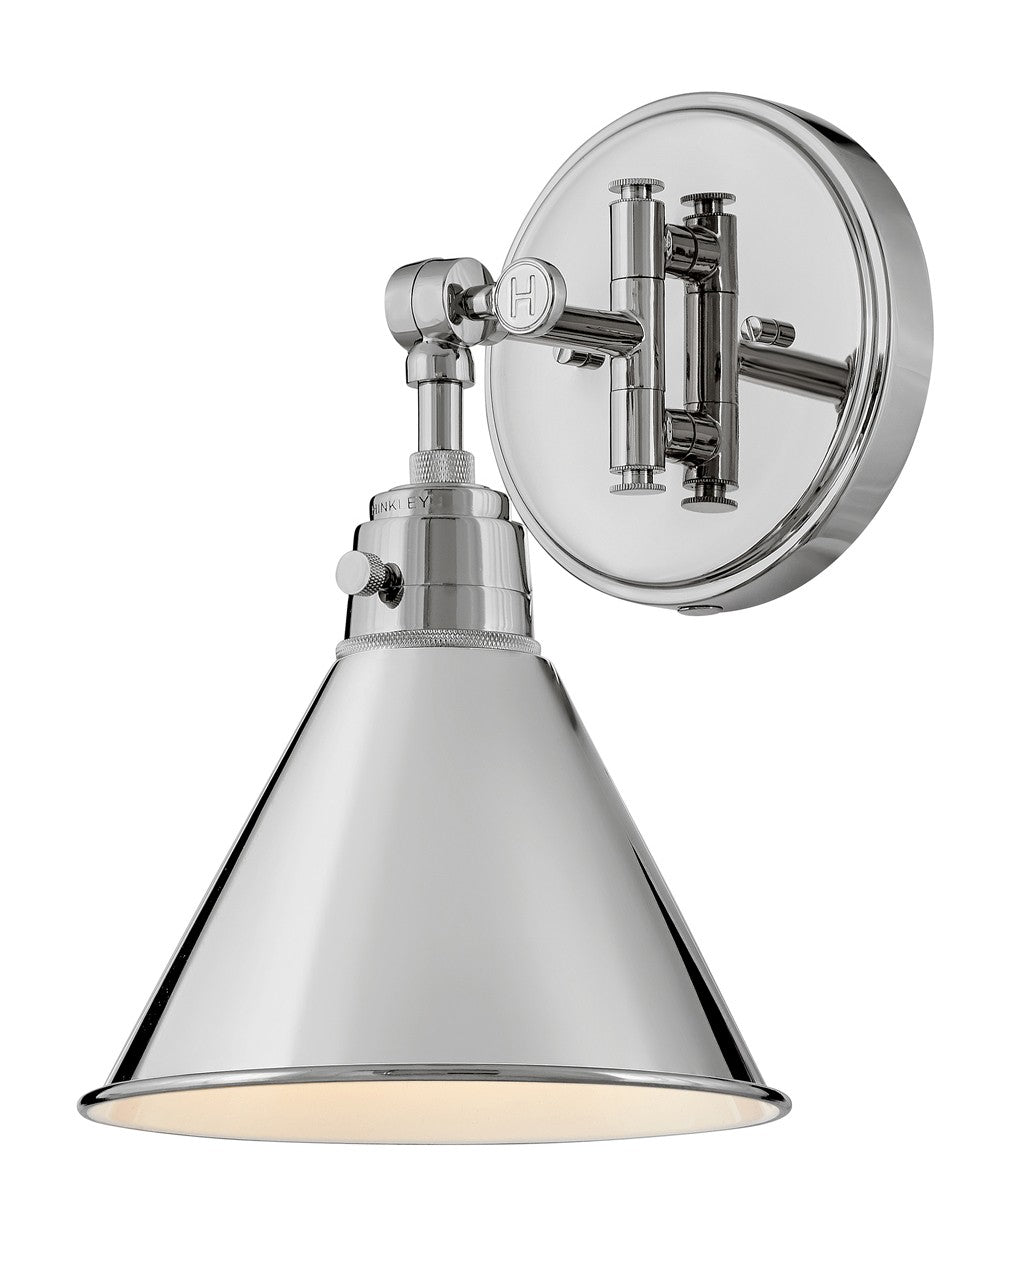 Arti LED Wall Sconce in Polished Nickel